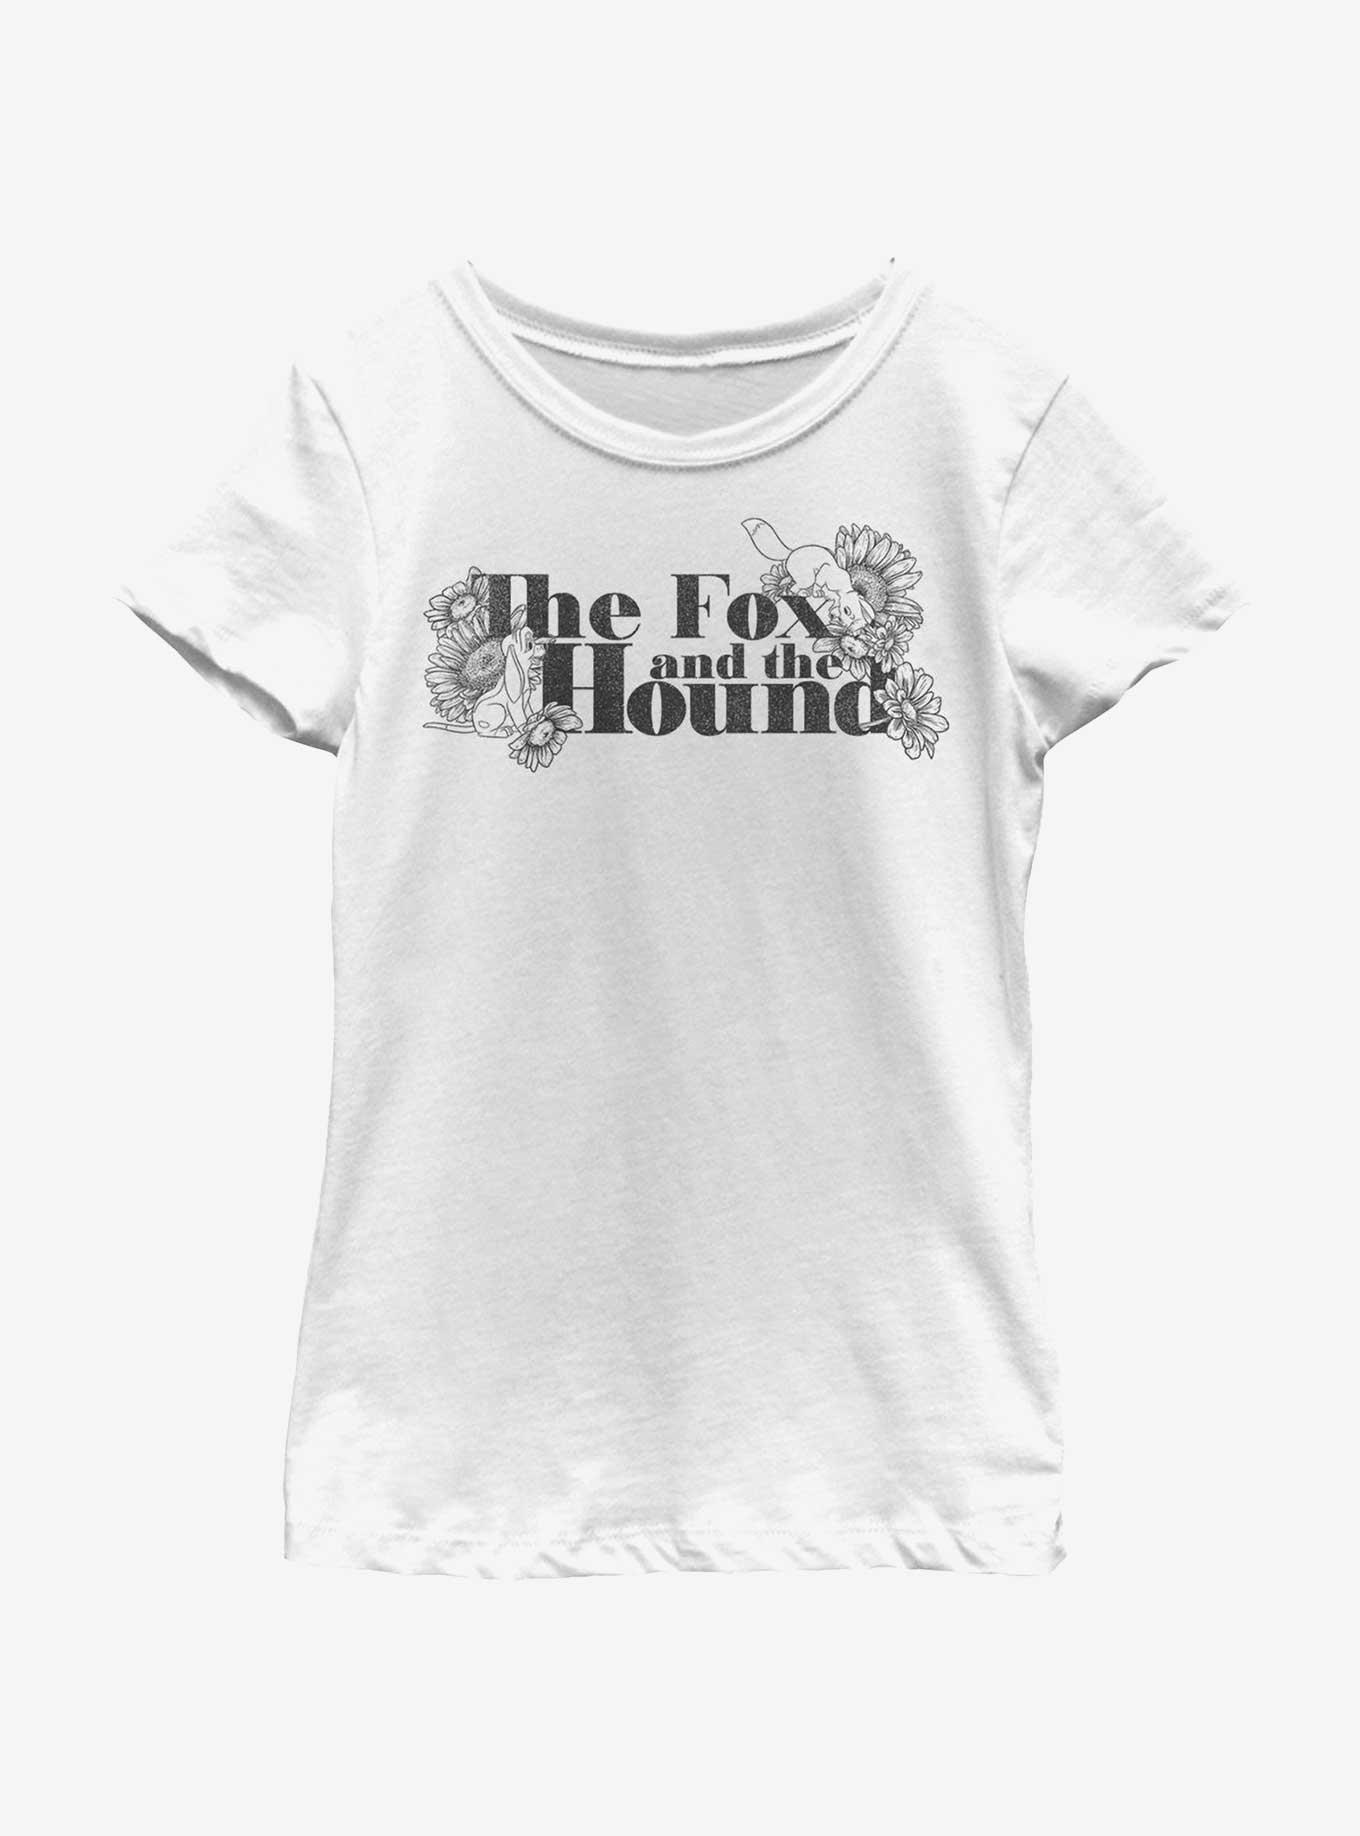 Disney The Fox and the Hound Floral Logo Youth Girls T-Shirt, WHITE, hi-res